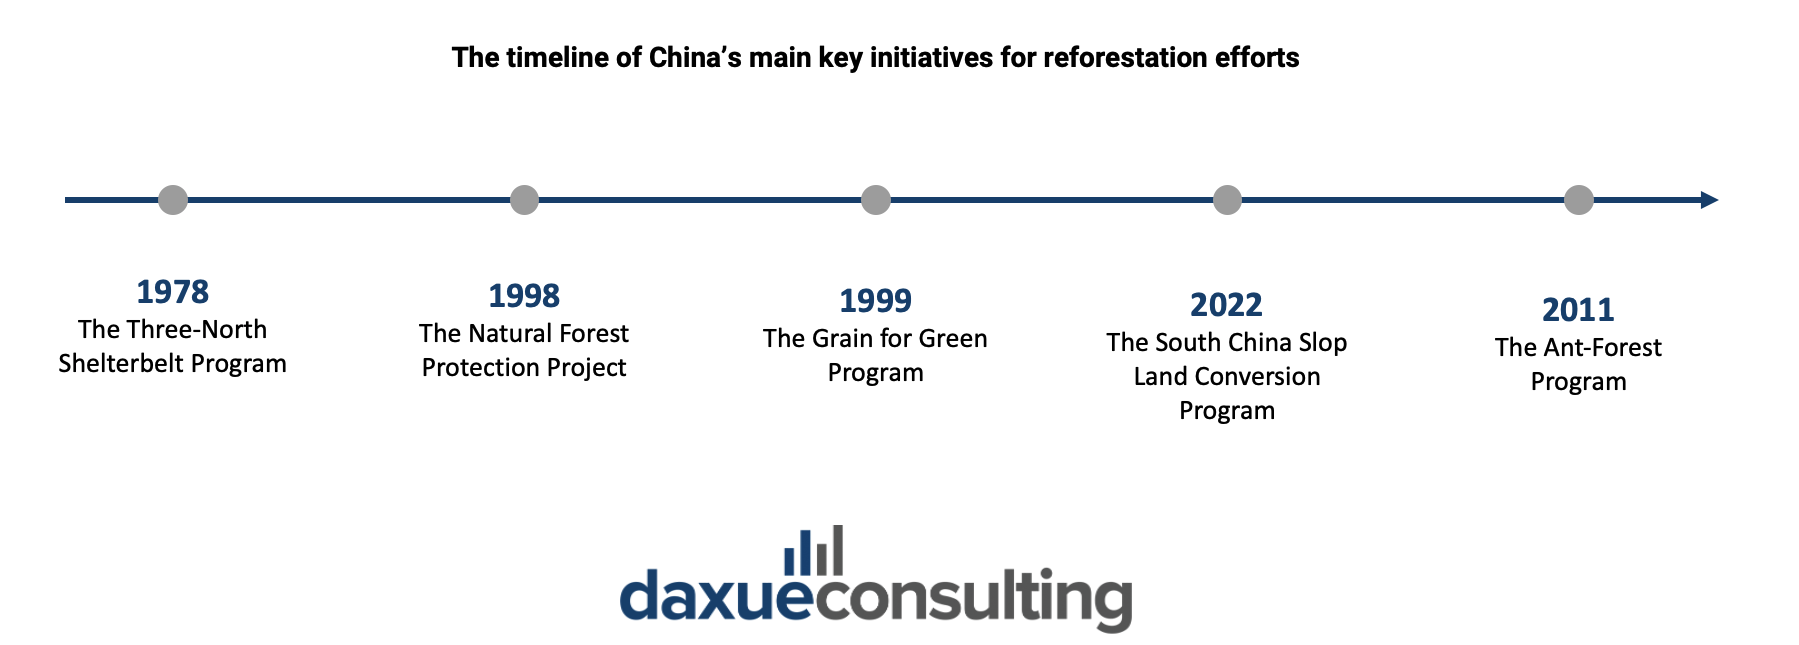 The timeline of main key initiatives for China's reforestation efforts